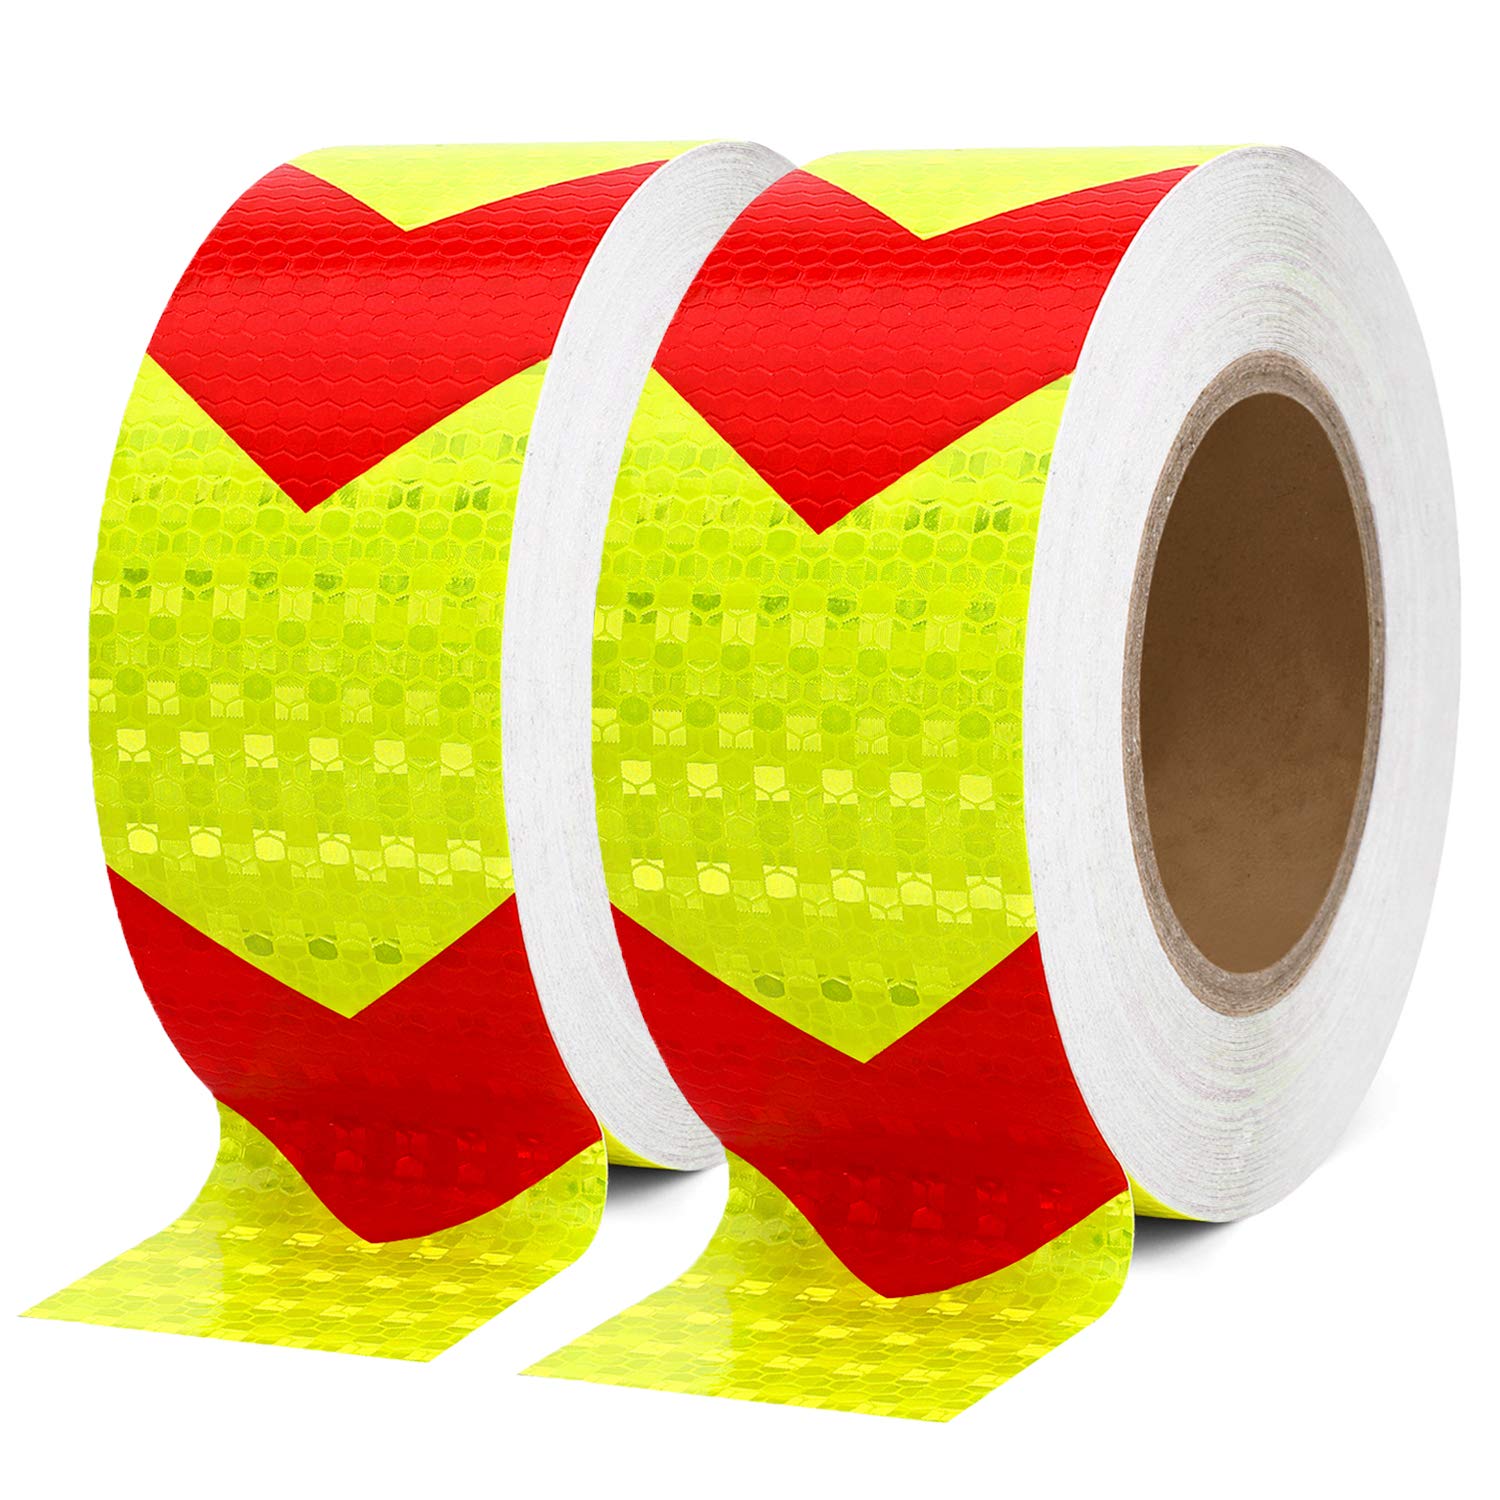 PVC Self-adhesive Reflective Safety Warning Arrow Sticker Tapes for Vehicles